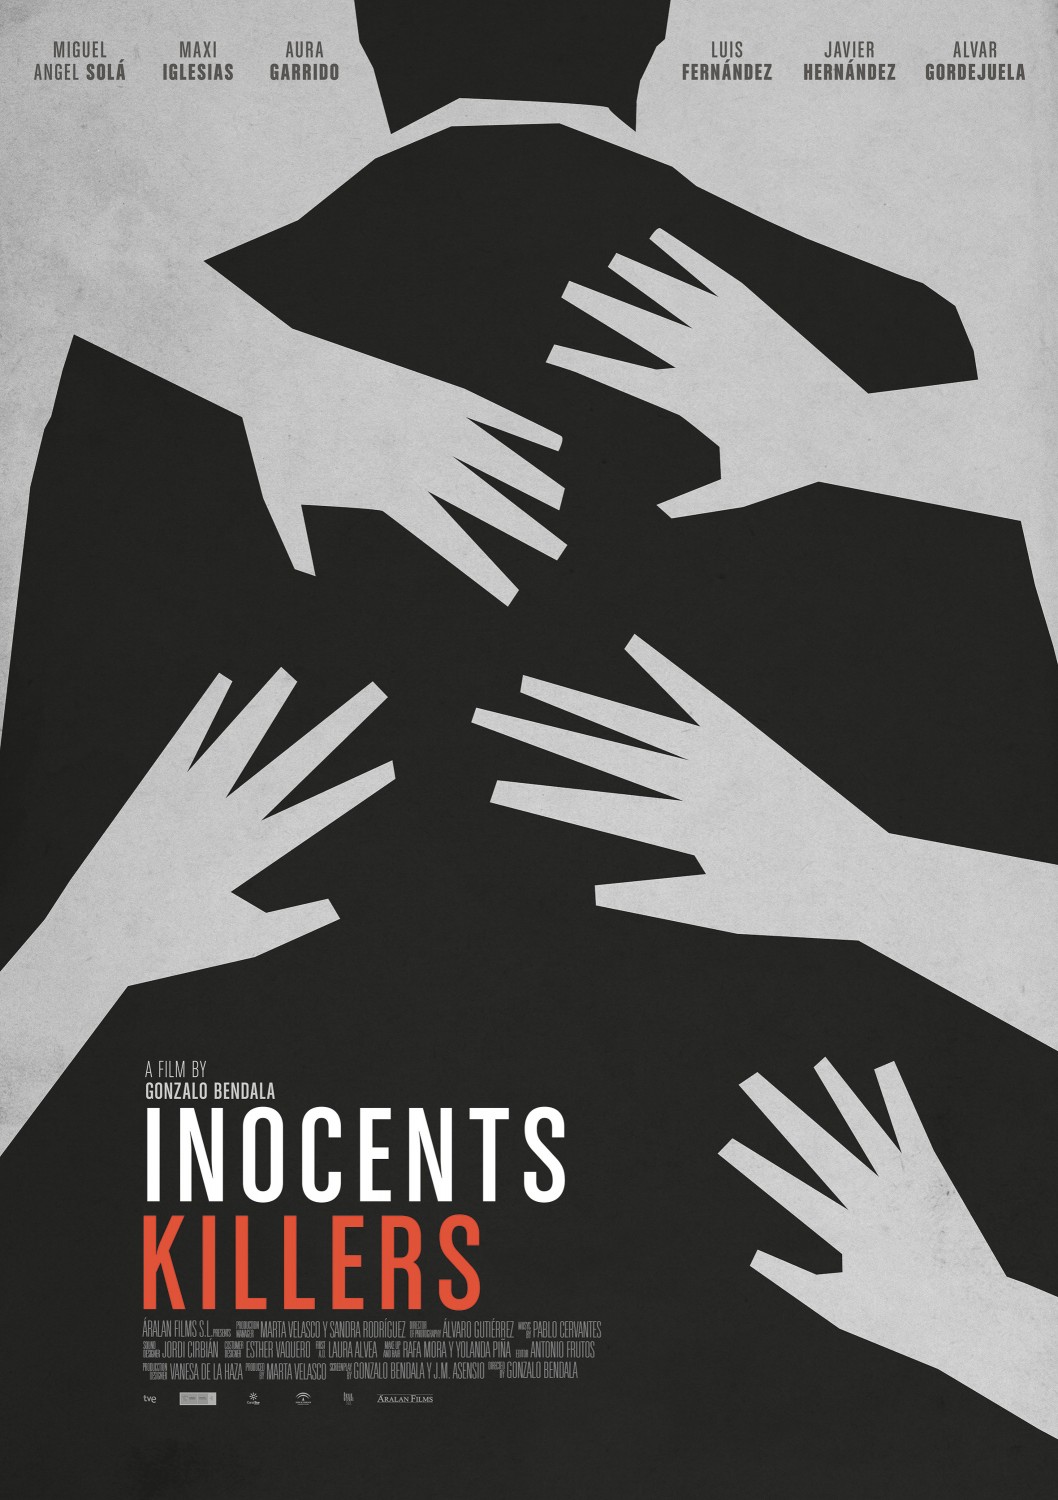 Extra Large Movie Poster Image for Asesinos inocentes 